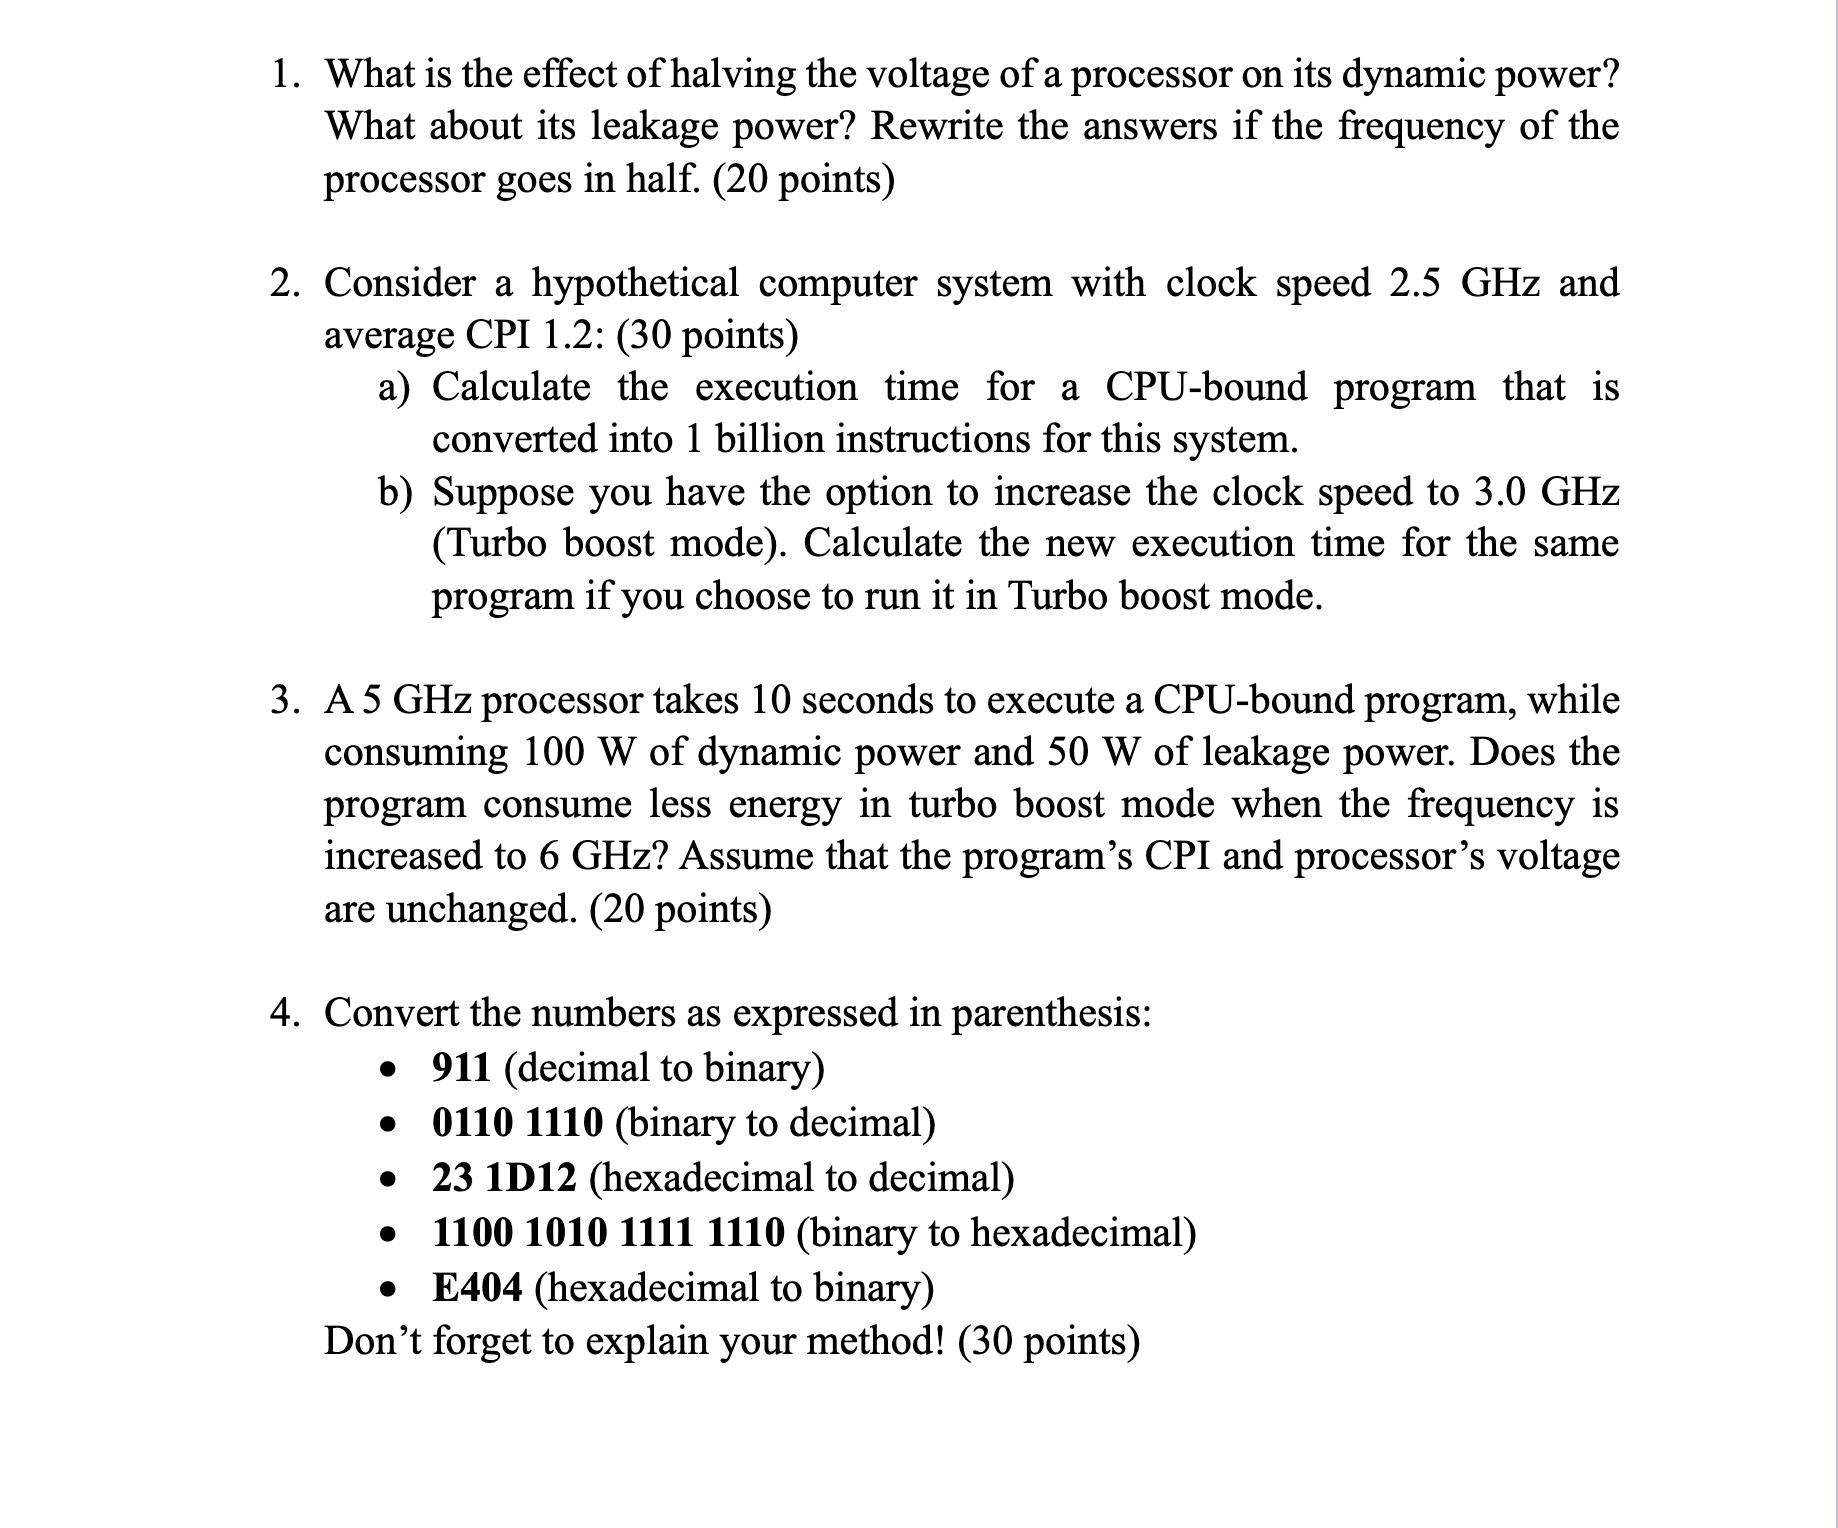 1. What is the effect of halving the voltage of a processor on its dynamic power? What about its leakage